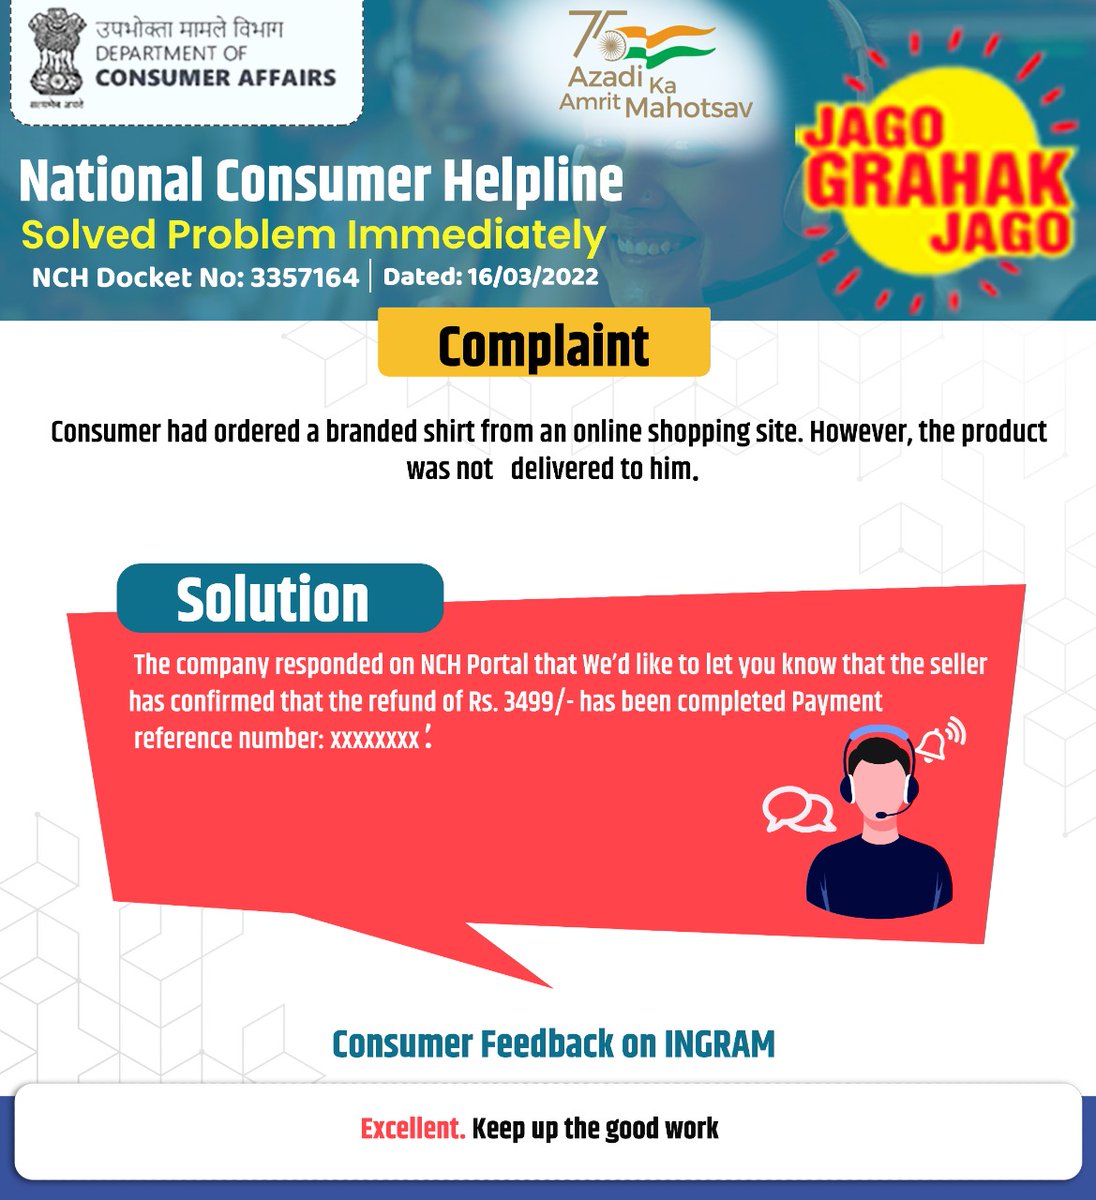 A success story of National Consumer Helpline (NCH). NCH helped a consumer in getting redressal of his grievance related to refund of a shirt. #JagoGrahakJago #NCH #success #story #AzadiKaAmritMahotsav